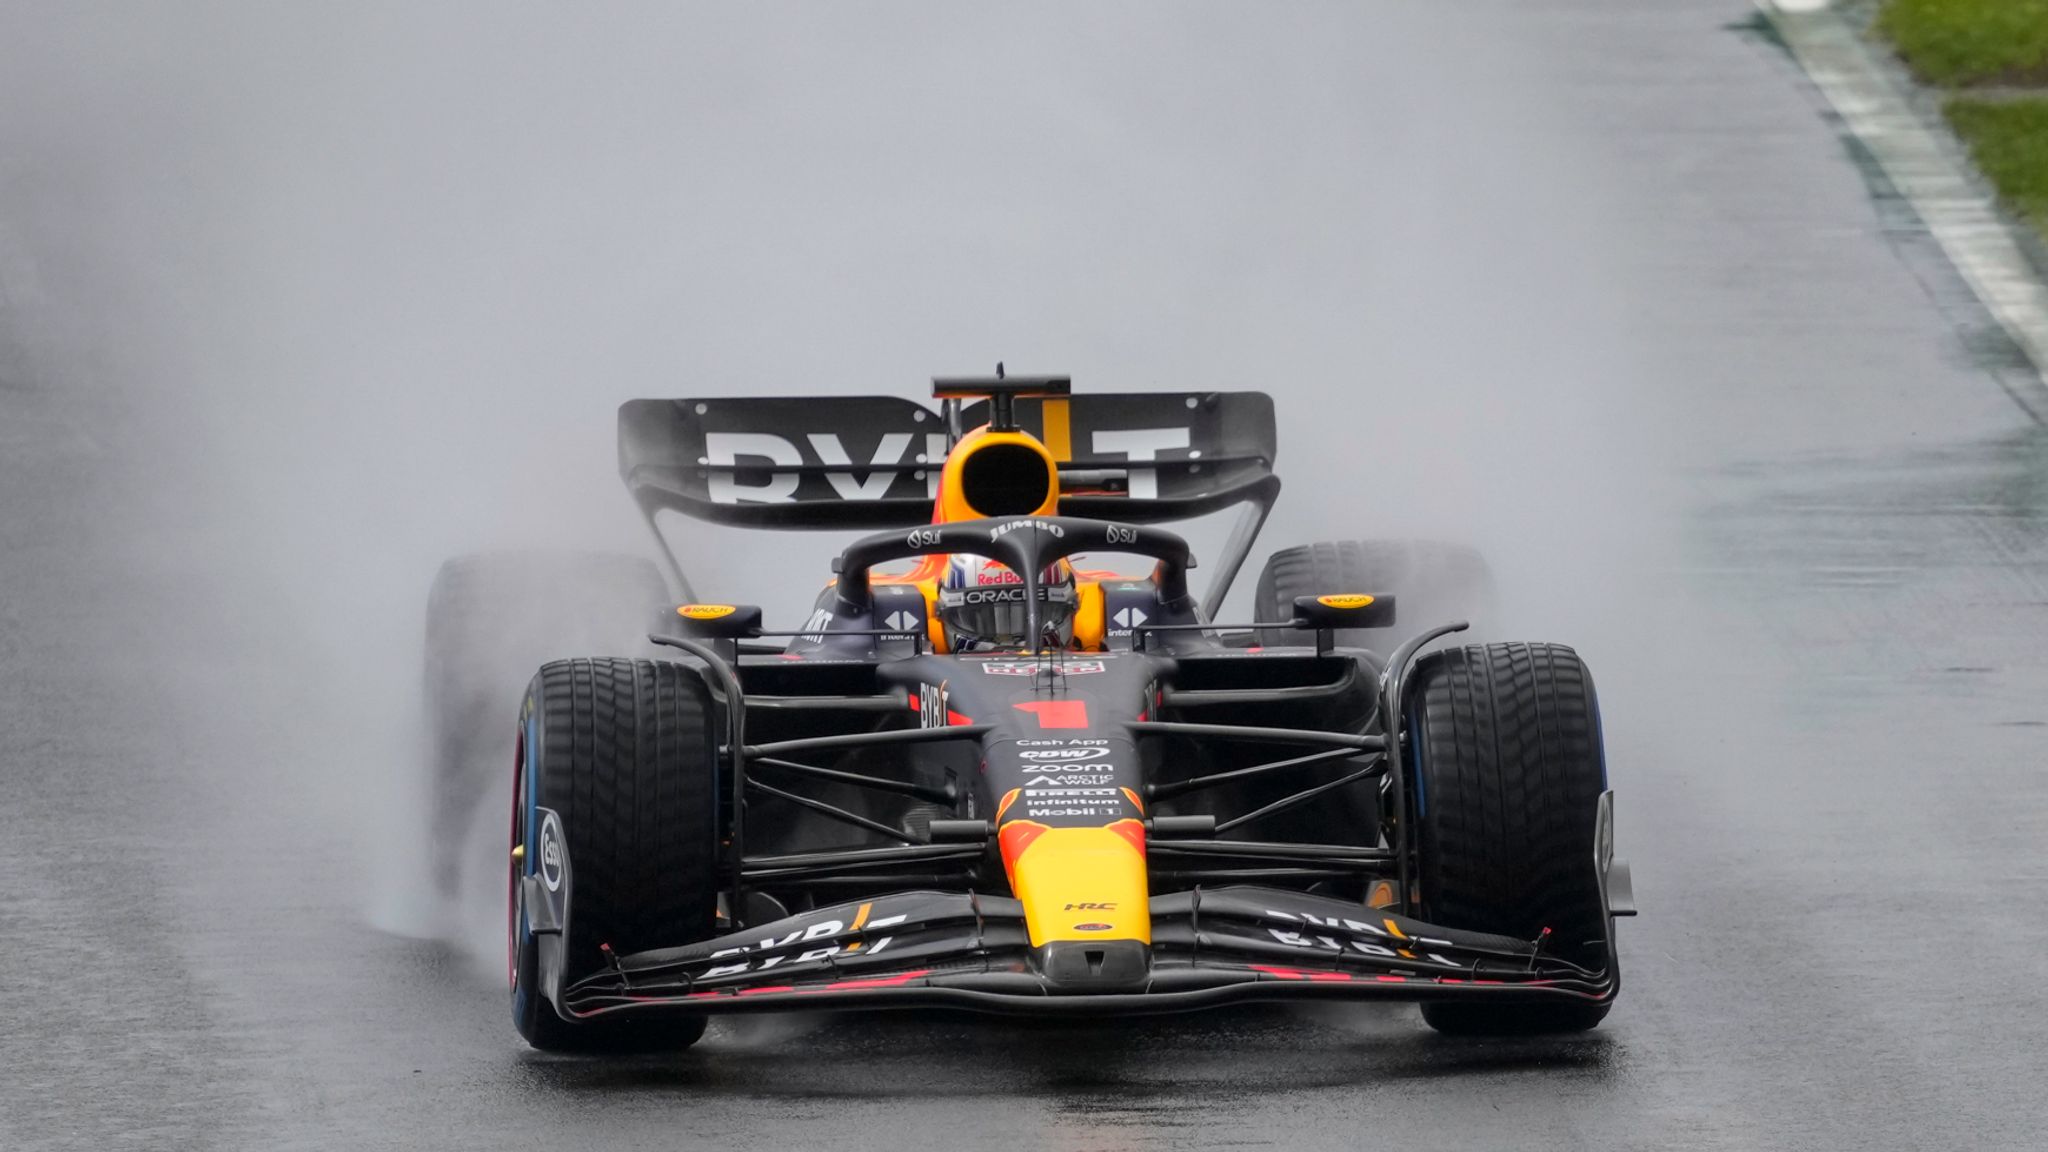 Dutch GP Max Verstappen tops chaotic wet final practice from George Russell after three red flags F1 News